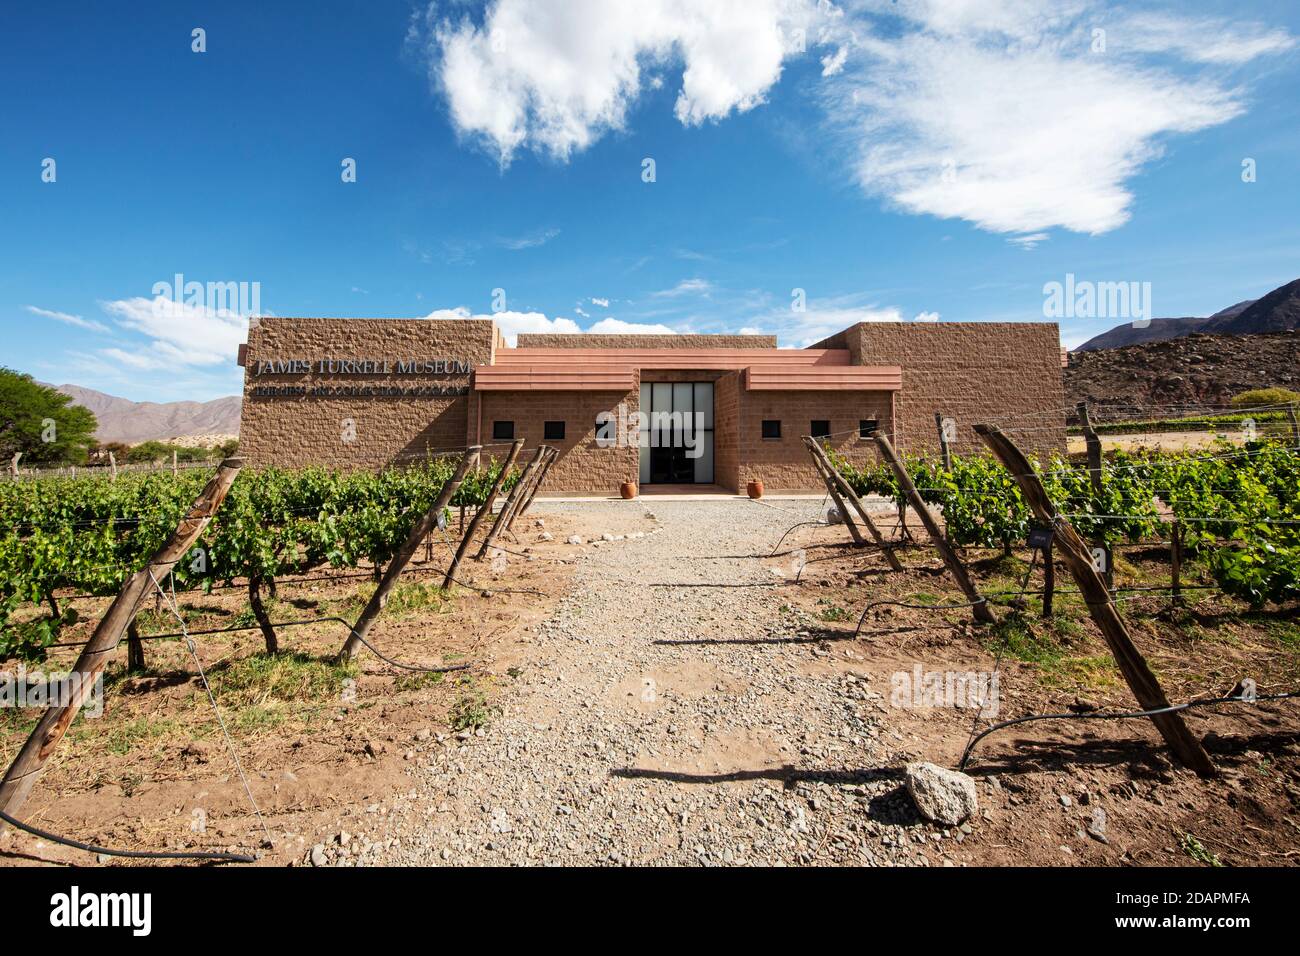 James Turrell Museum, Colomé, located in Calchaquí valley at 2,300 meters above sea, Salta Province, Argentina. Stock Photo